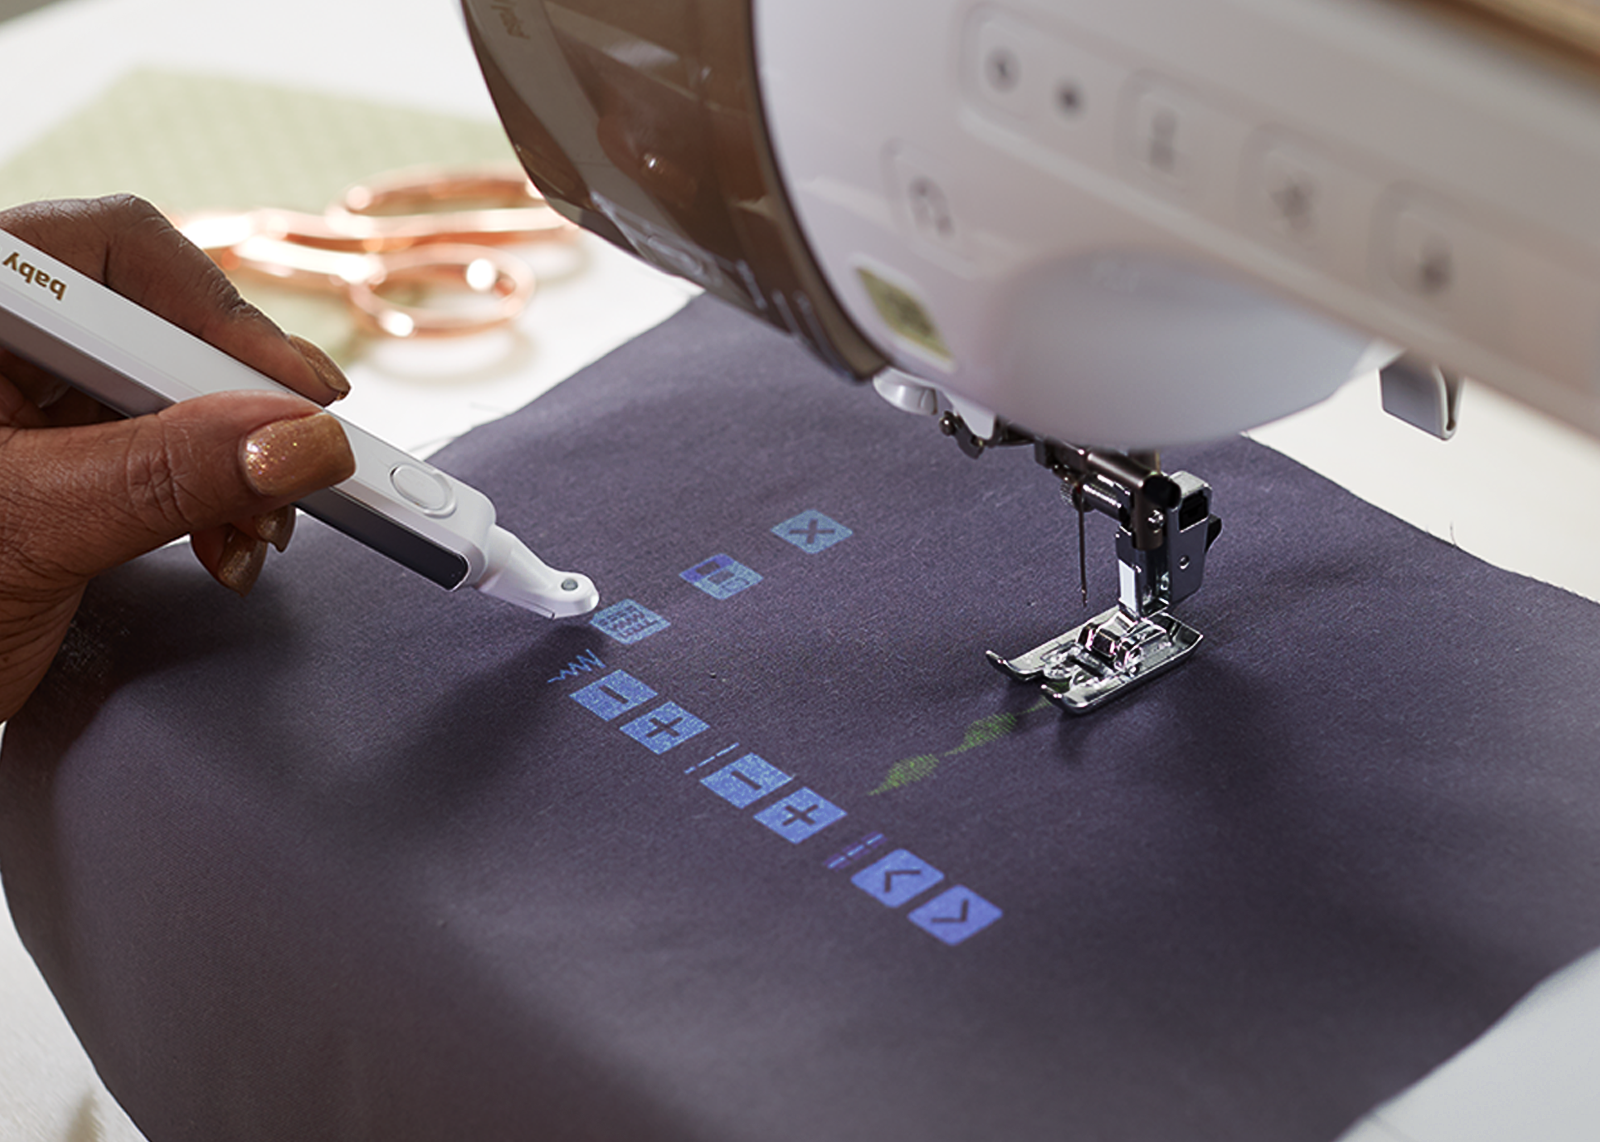 Move the embroidery placement right on the fabric with the Baby Lock Solaris 2 Sewing and Embroidery Machine